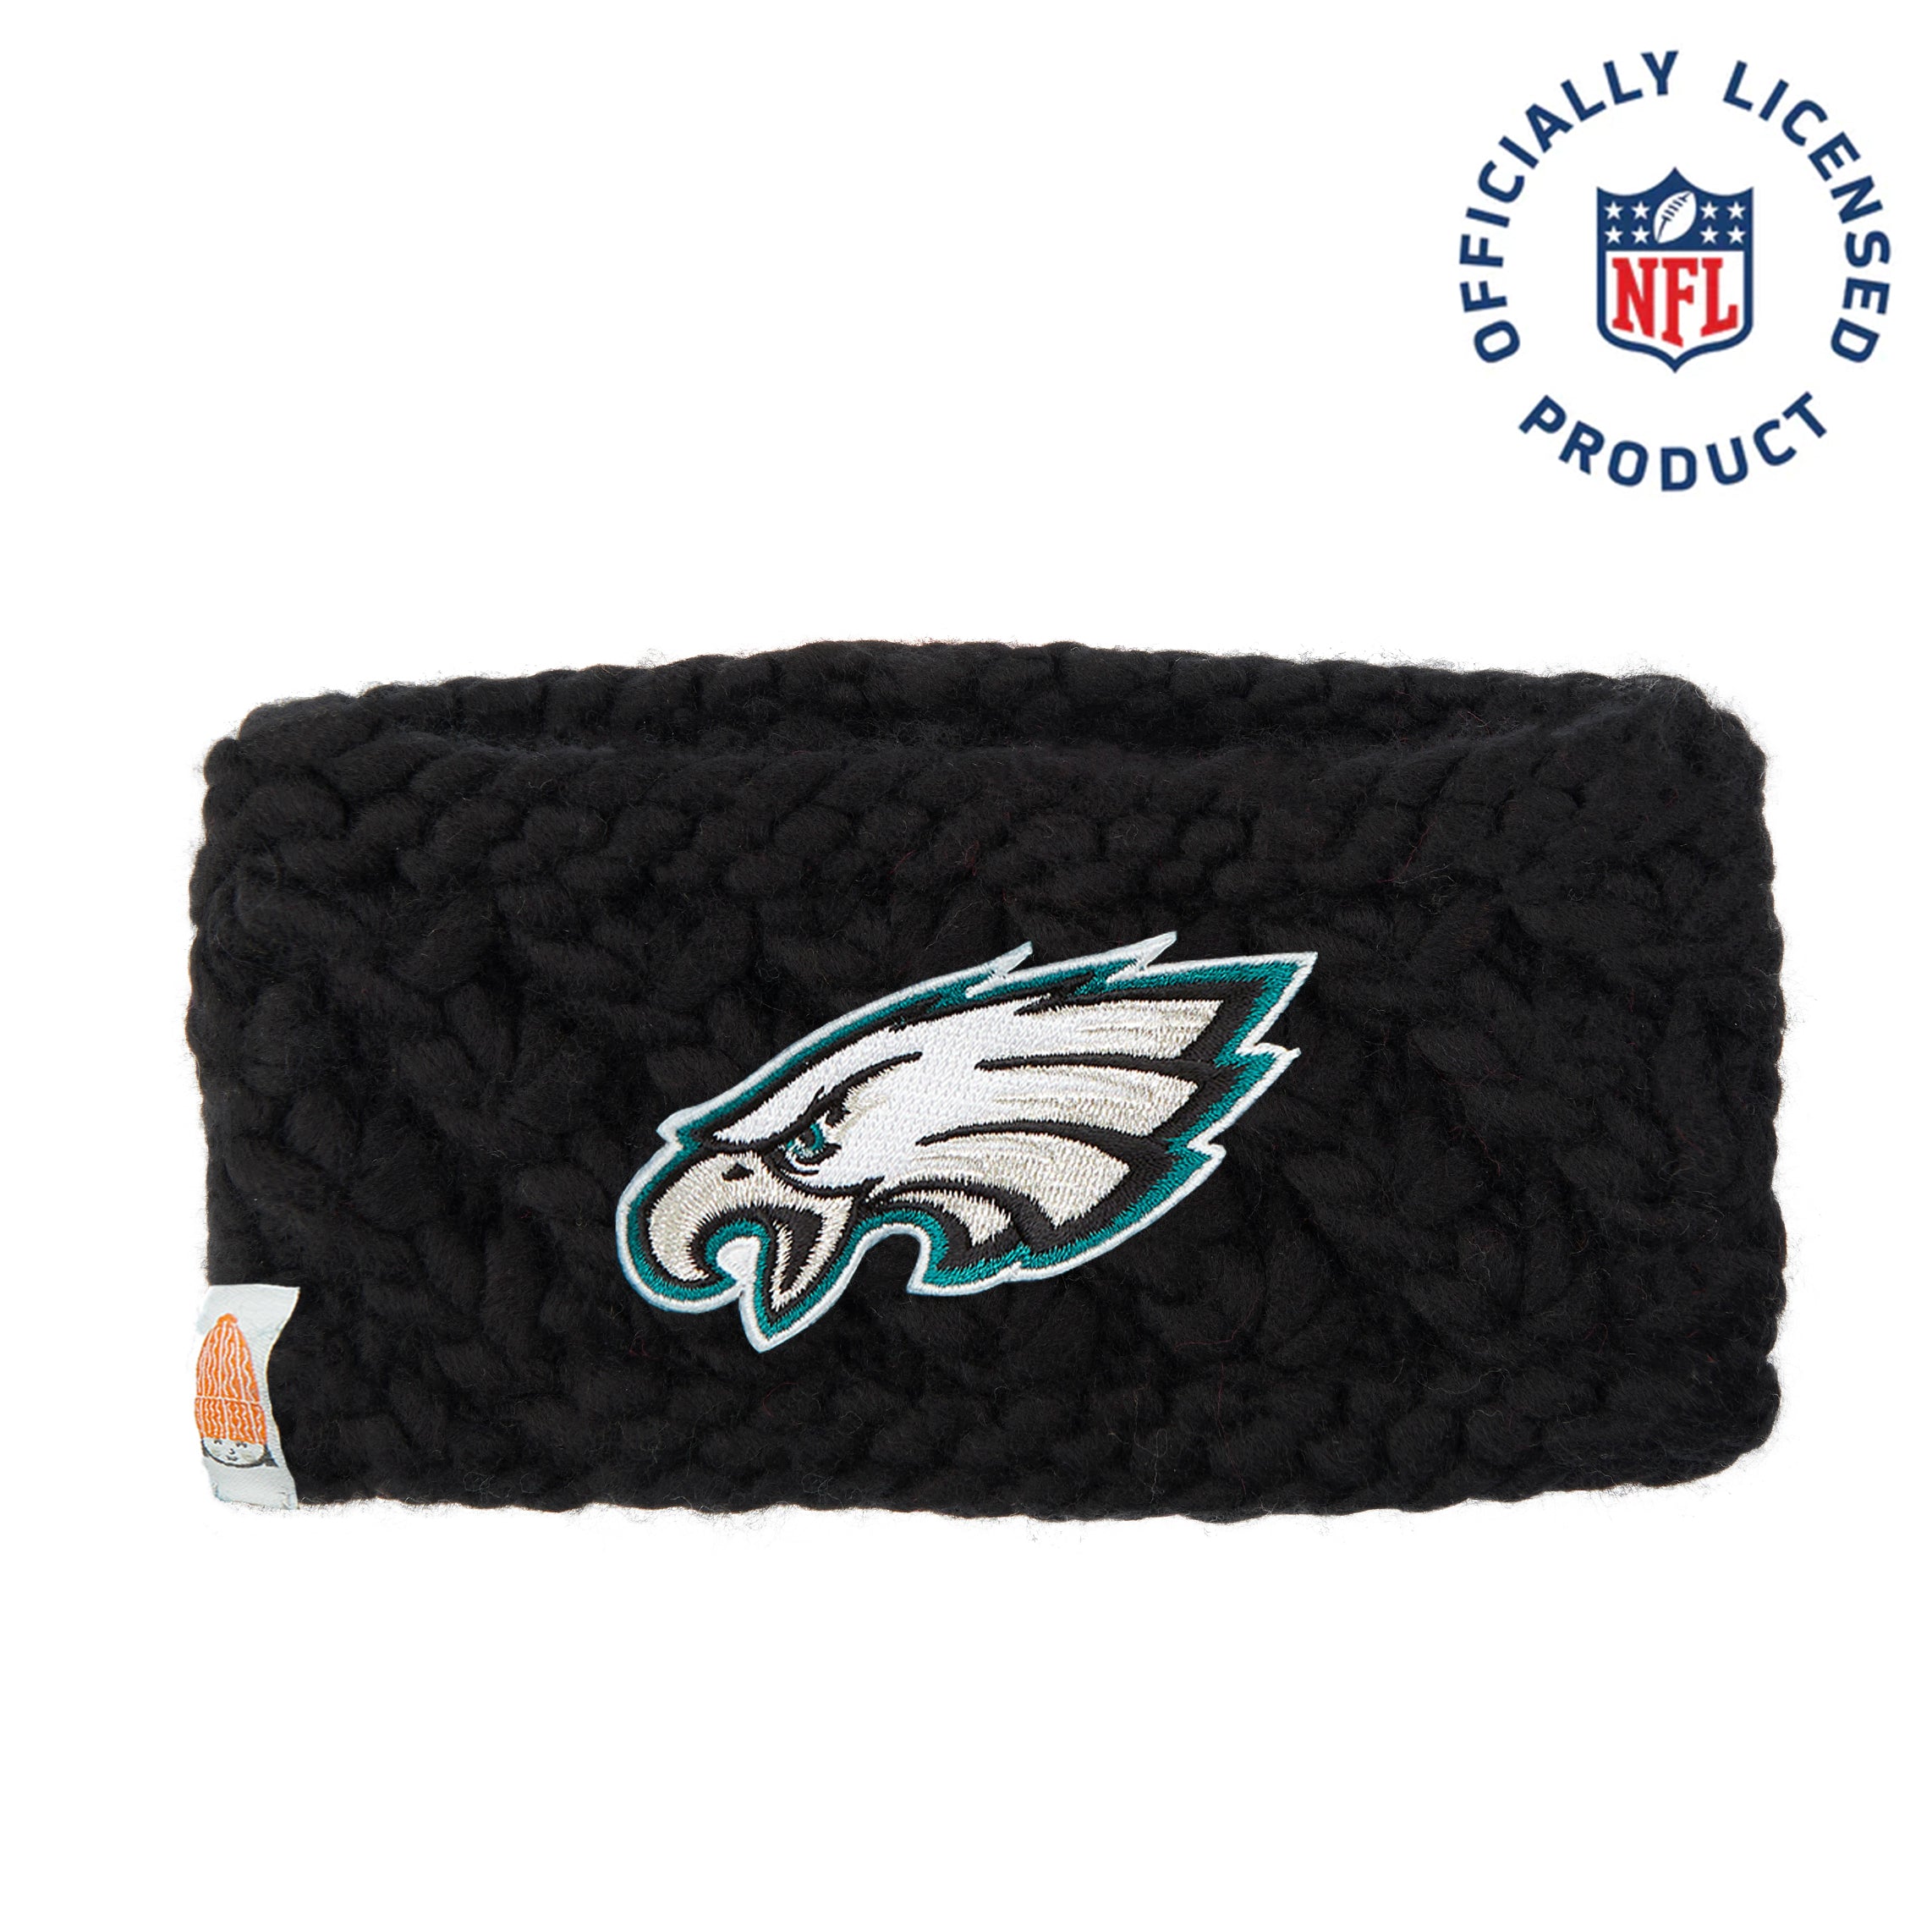 Eagles Super Bowl Headband / Hat by 2nd Grade at the Shore